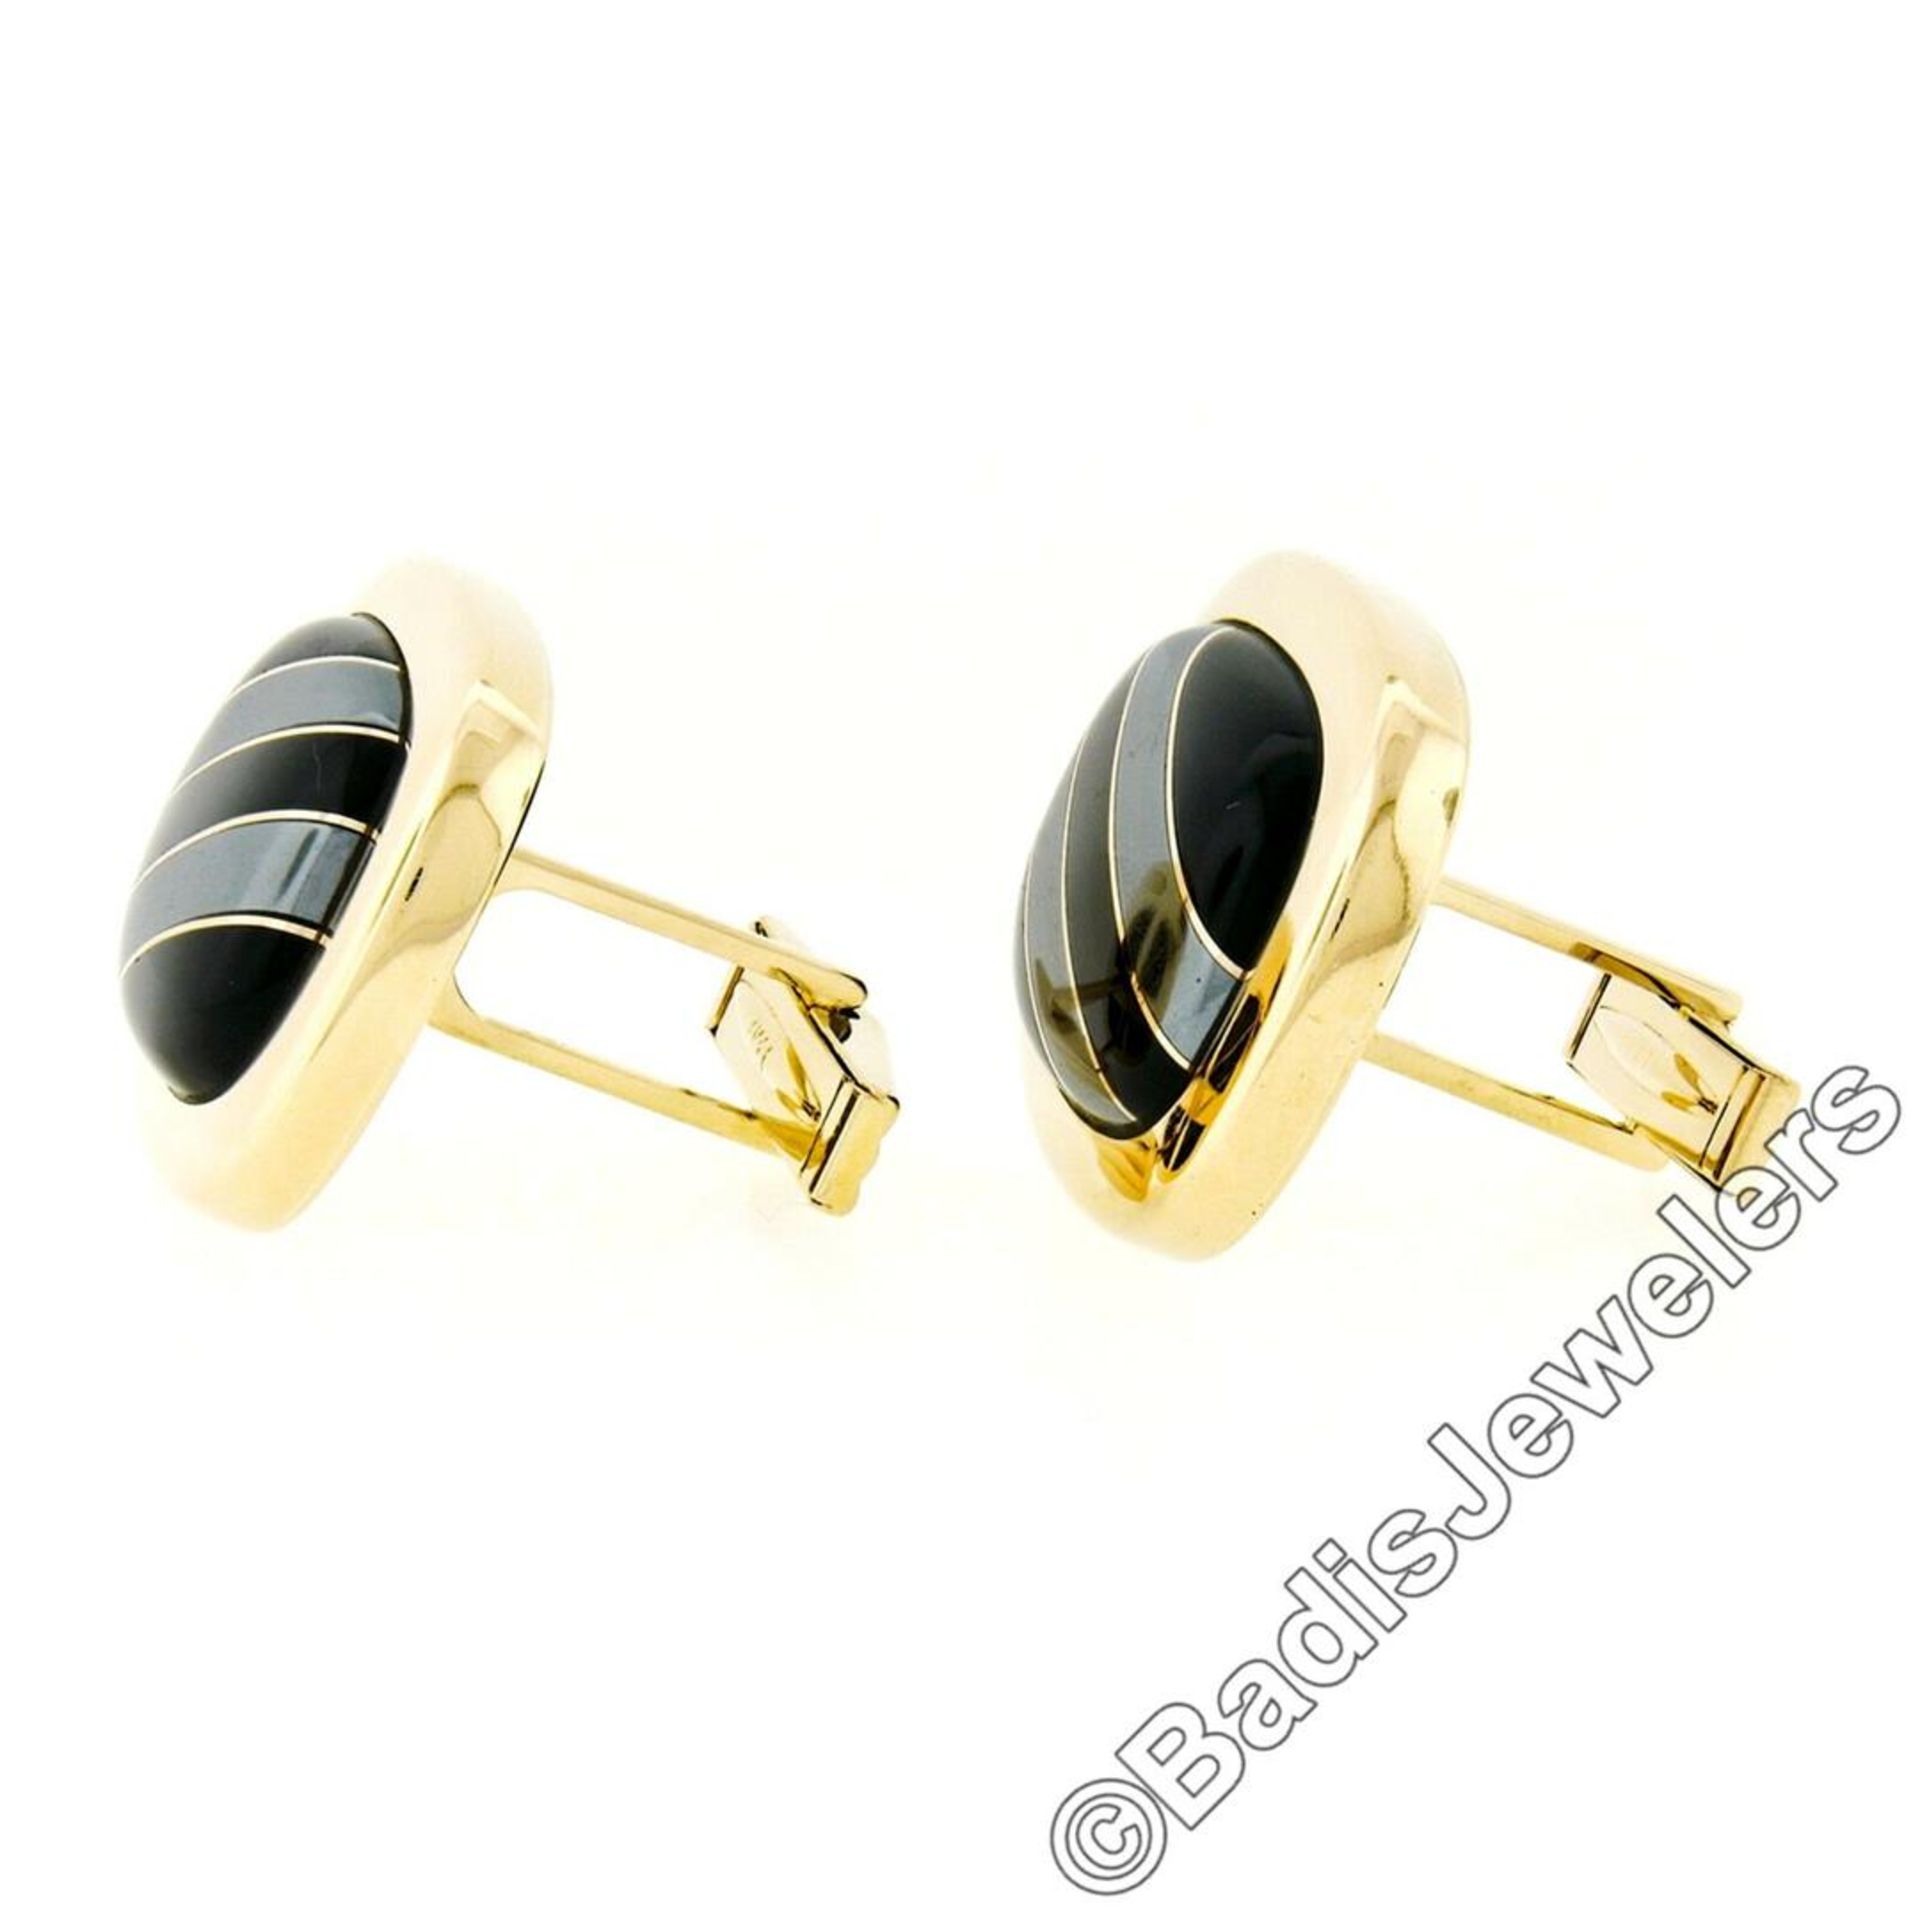 Vintage 14kt Yellow Gold Swivel Cuff Links w/ Hematite Inlaid in Black Onyx - Image 3 of 6